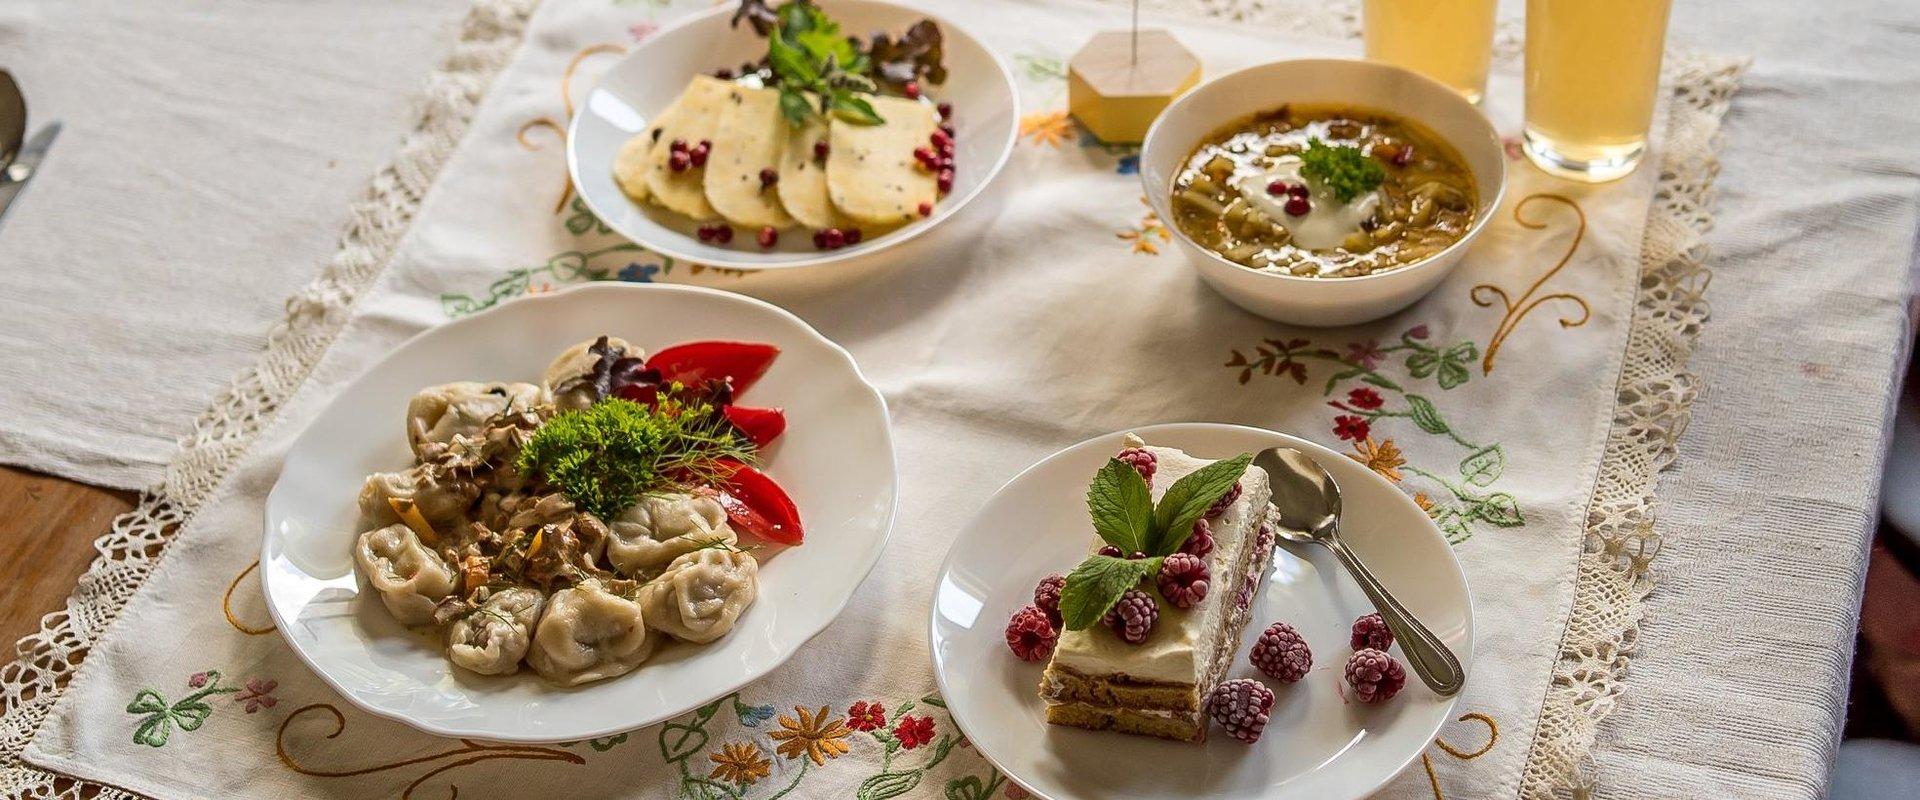 The third Peipsi Food Street 175 km will take place from 17th to 18st of August from Vasknarva to Saabolda. Pop-up restaurants will be opened on a roa